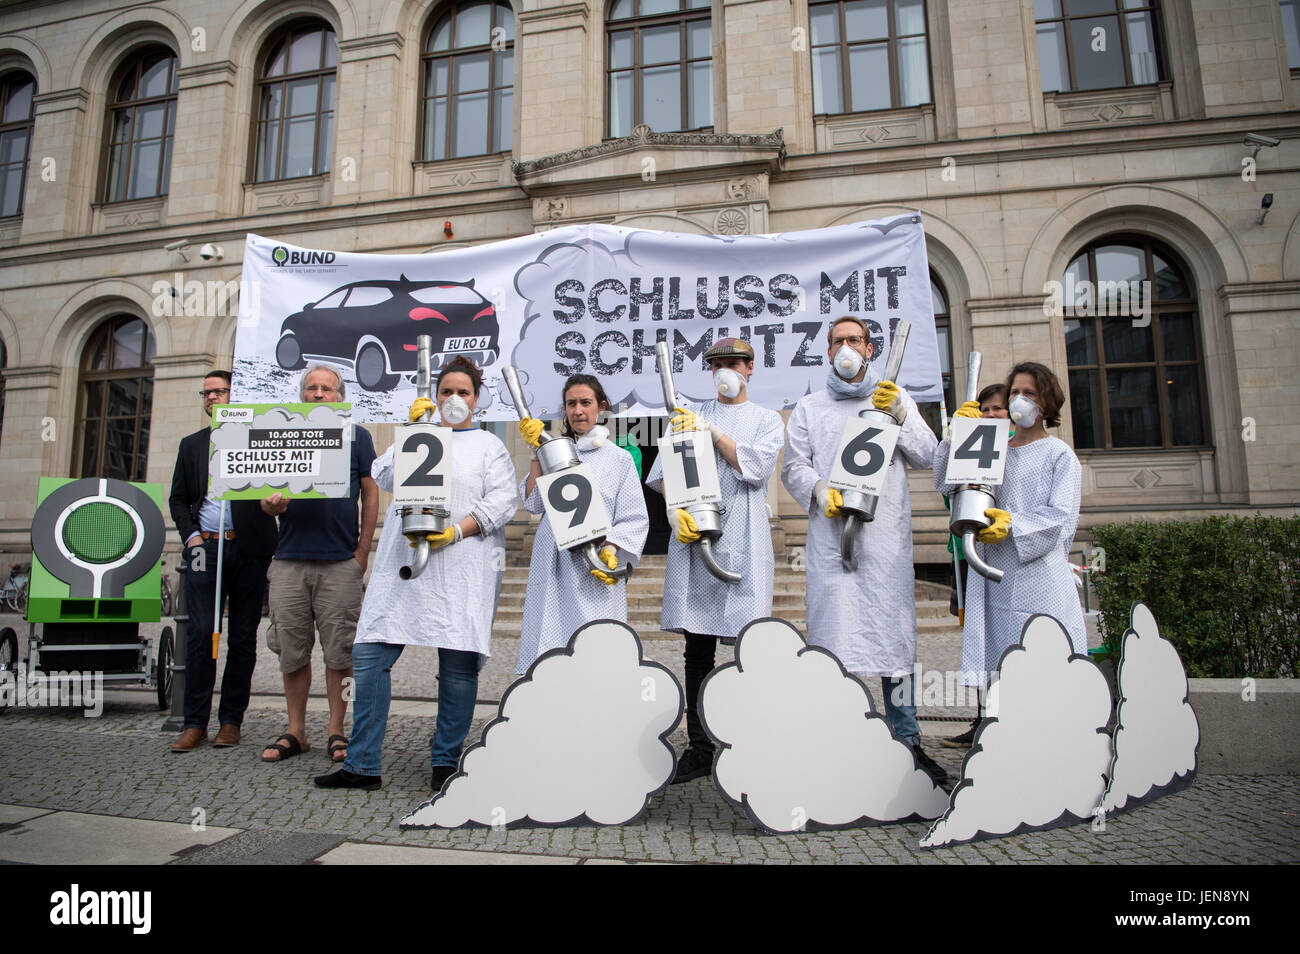 Berlin, Germany. 27th June, 2017. Eight activists of the Association for the Environment and Nature Protection Germany (BUND) hand over a petition titled 'Schluss mit schmutzig!' ('End the dirt!'), signed by 29,164 participants, demanding a stop of the sale of Diesel cars with an extreme exhaust emission from German Minister of Traffic Dobrindt. Photo: Bernd von Jutrczenka/dpa/Alamy Live News Stock Photo